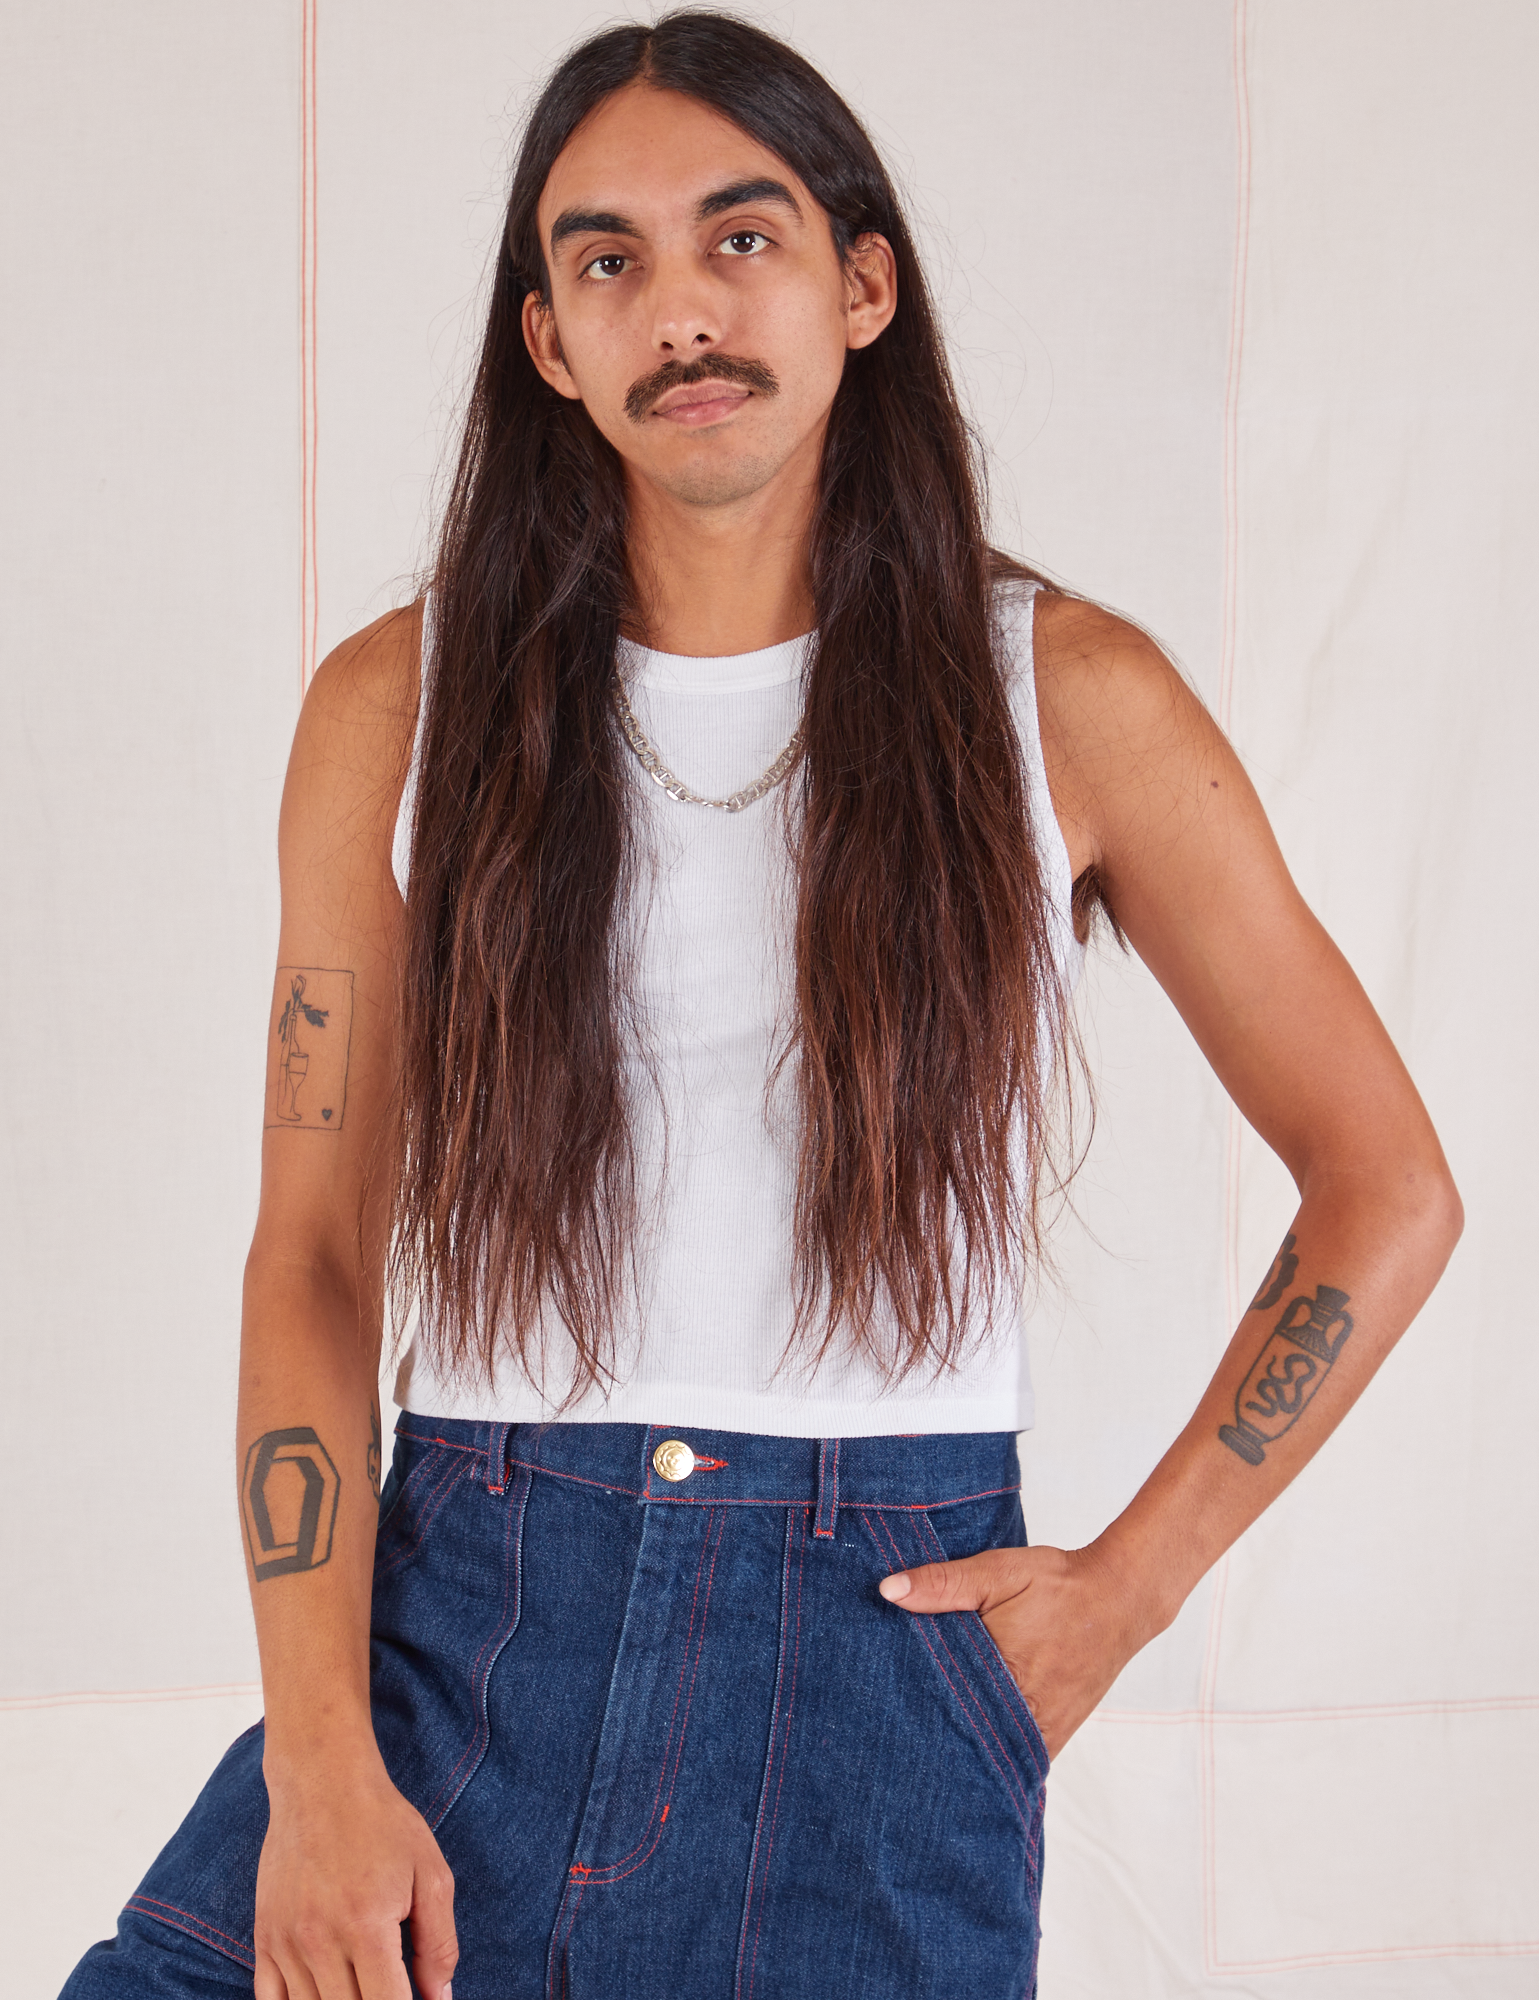 Anthony is 5’10” and wearing S Muscle Tee in Vintage Tee Off-White